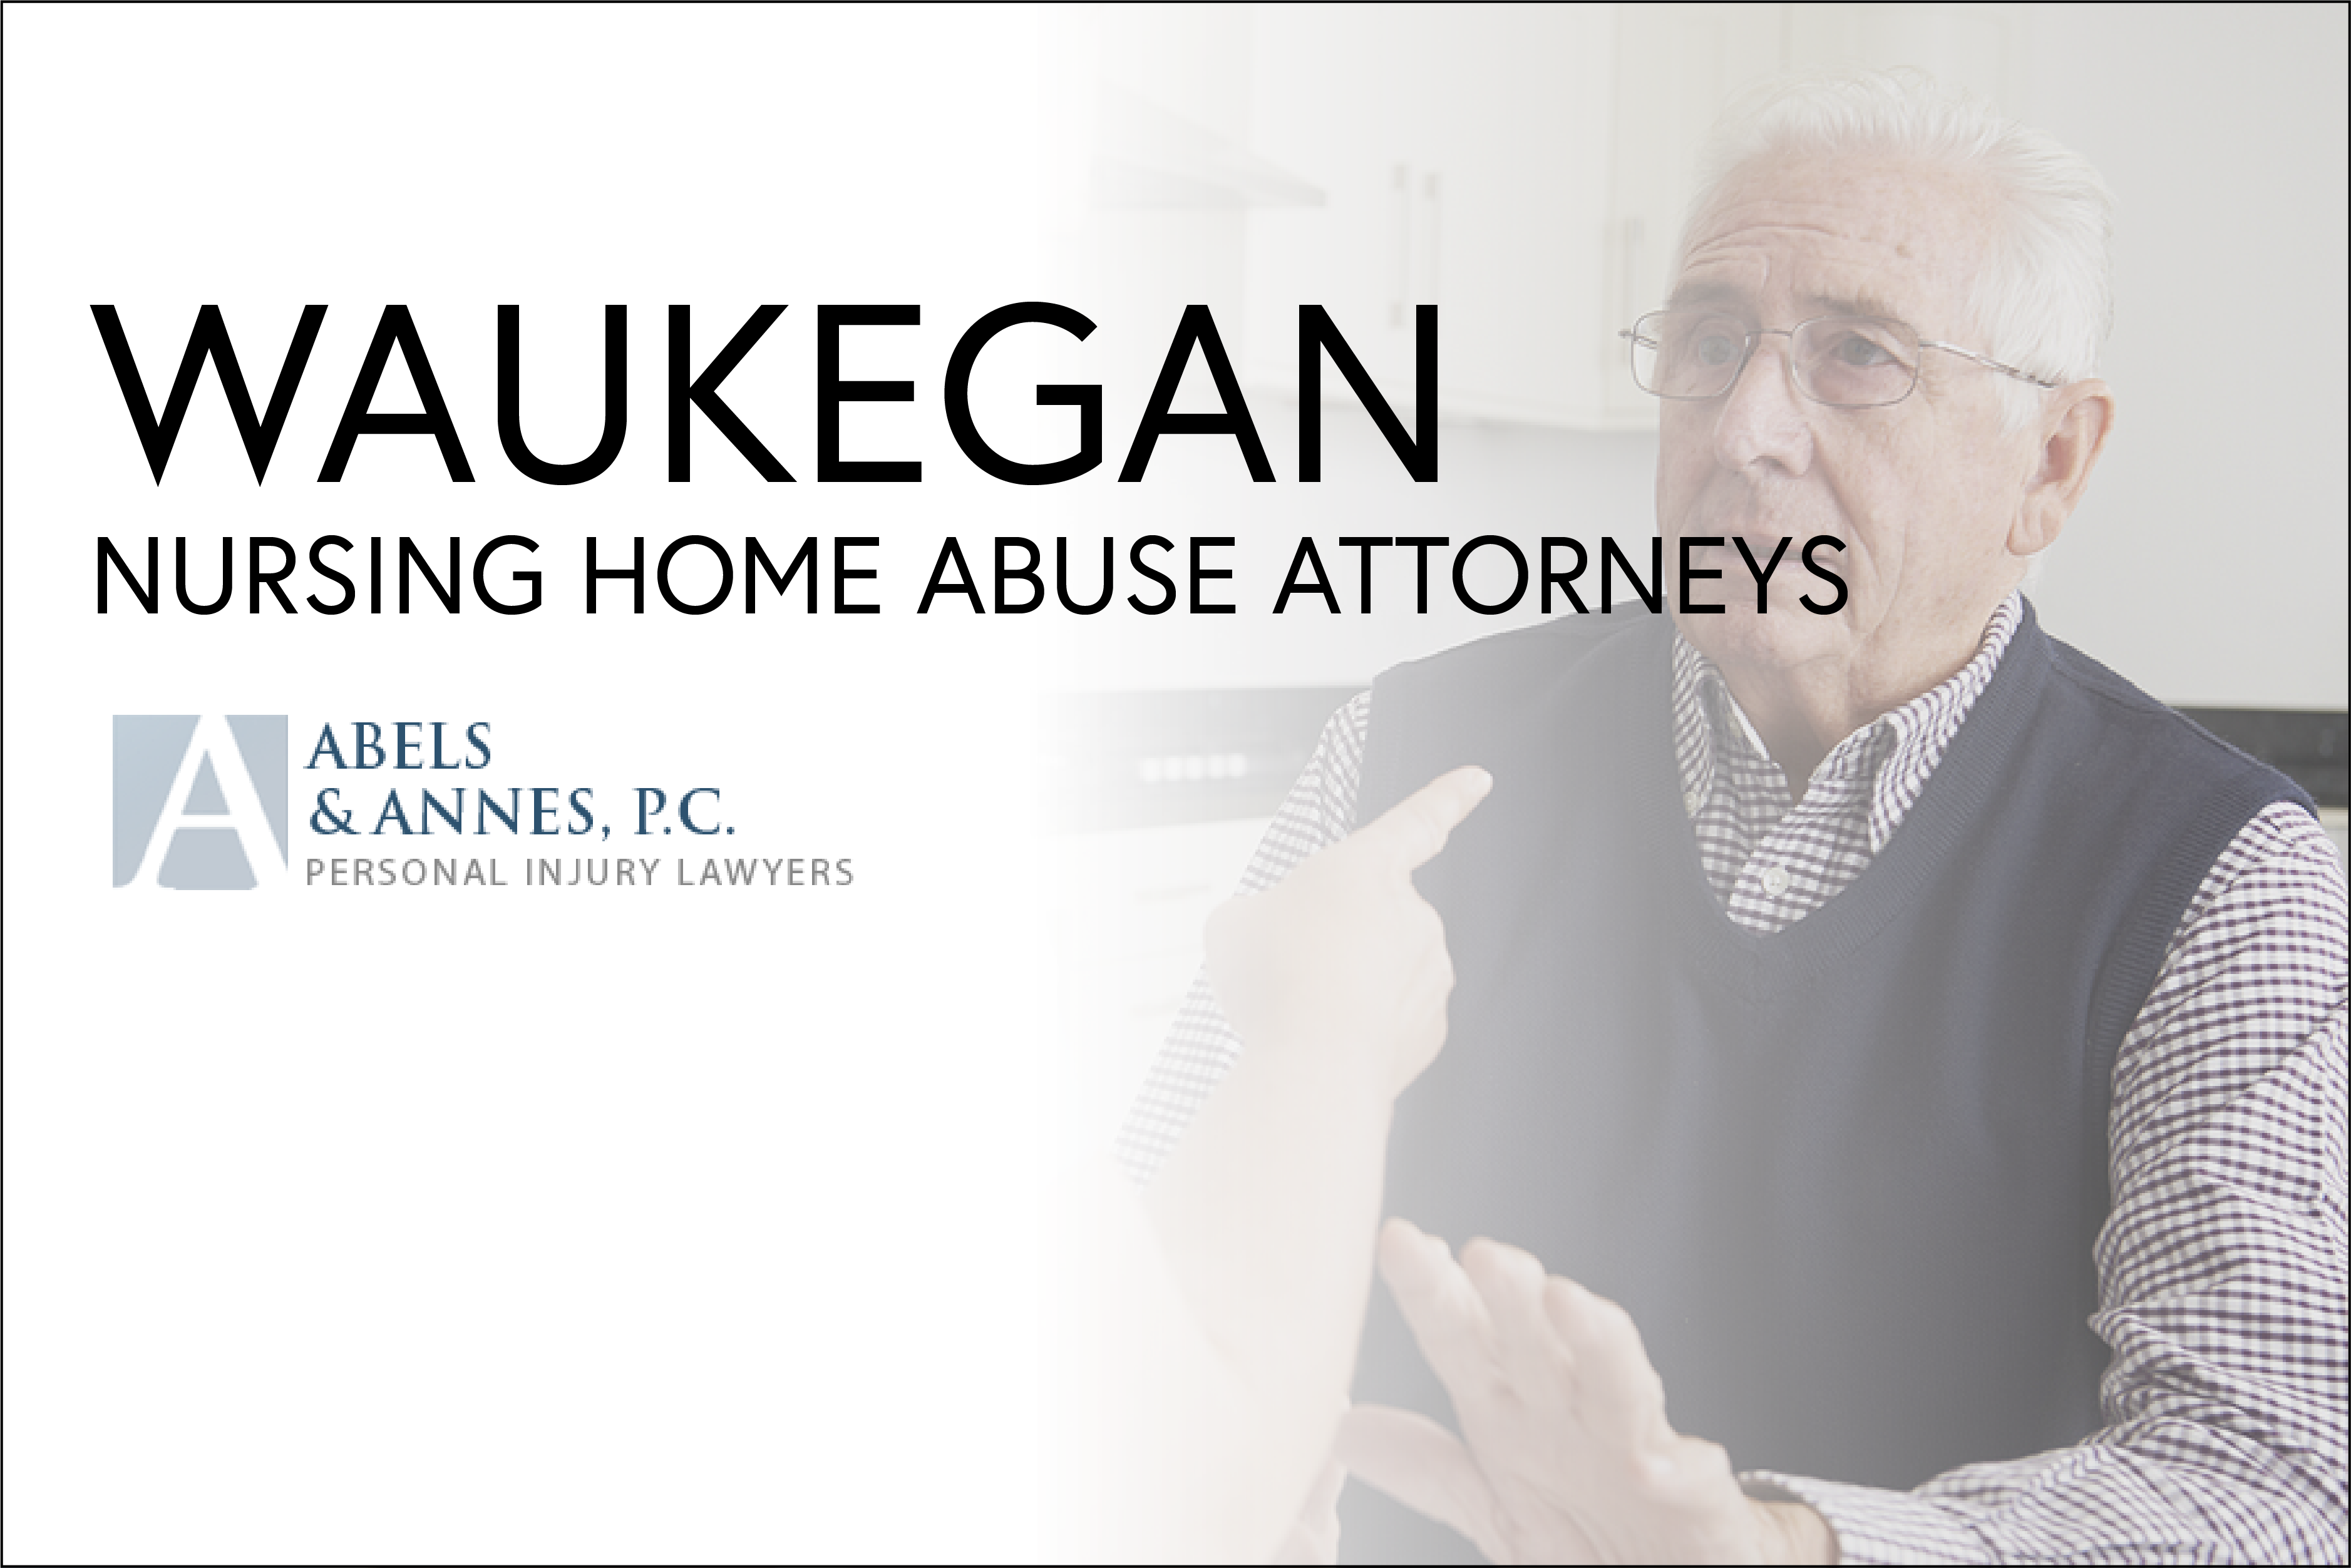 Waukegan Nursing Home Abuse Attorneys - Abels and Annes Personal Injury Lawyers